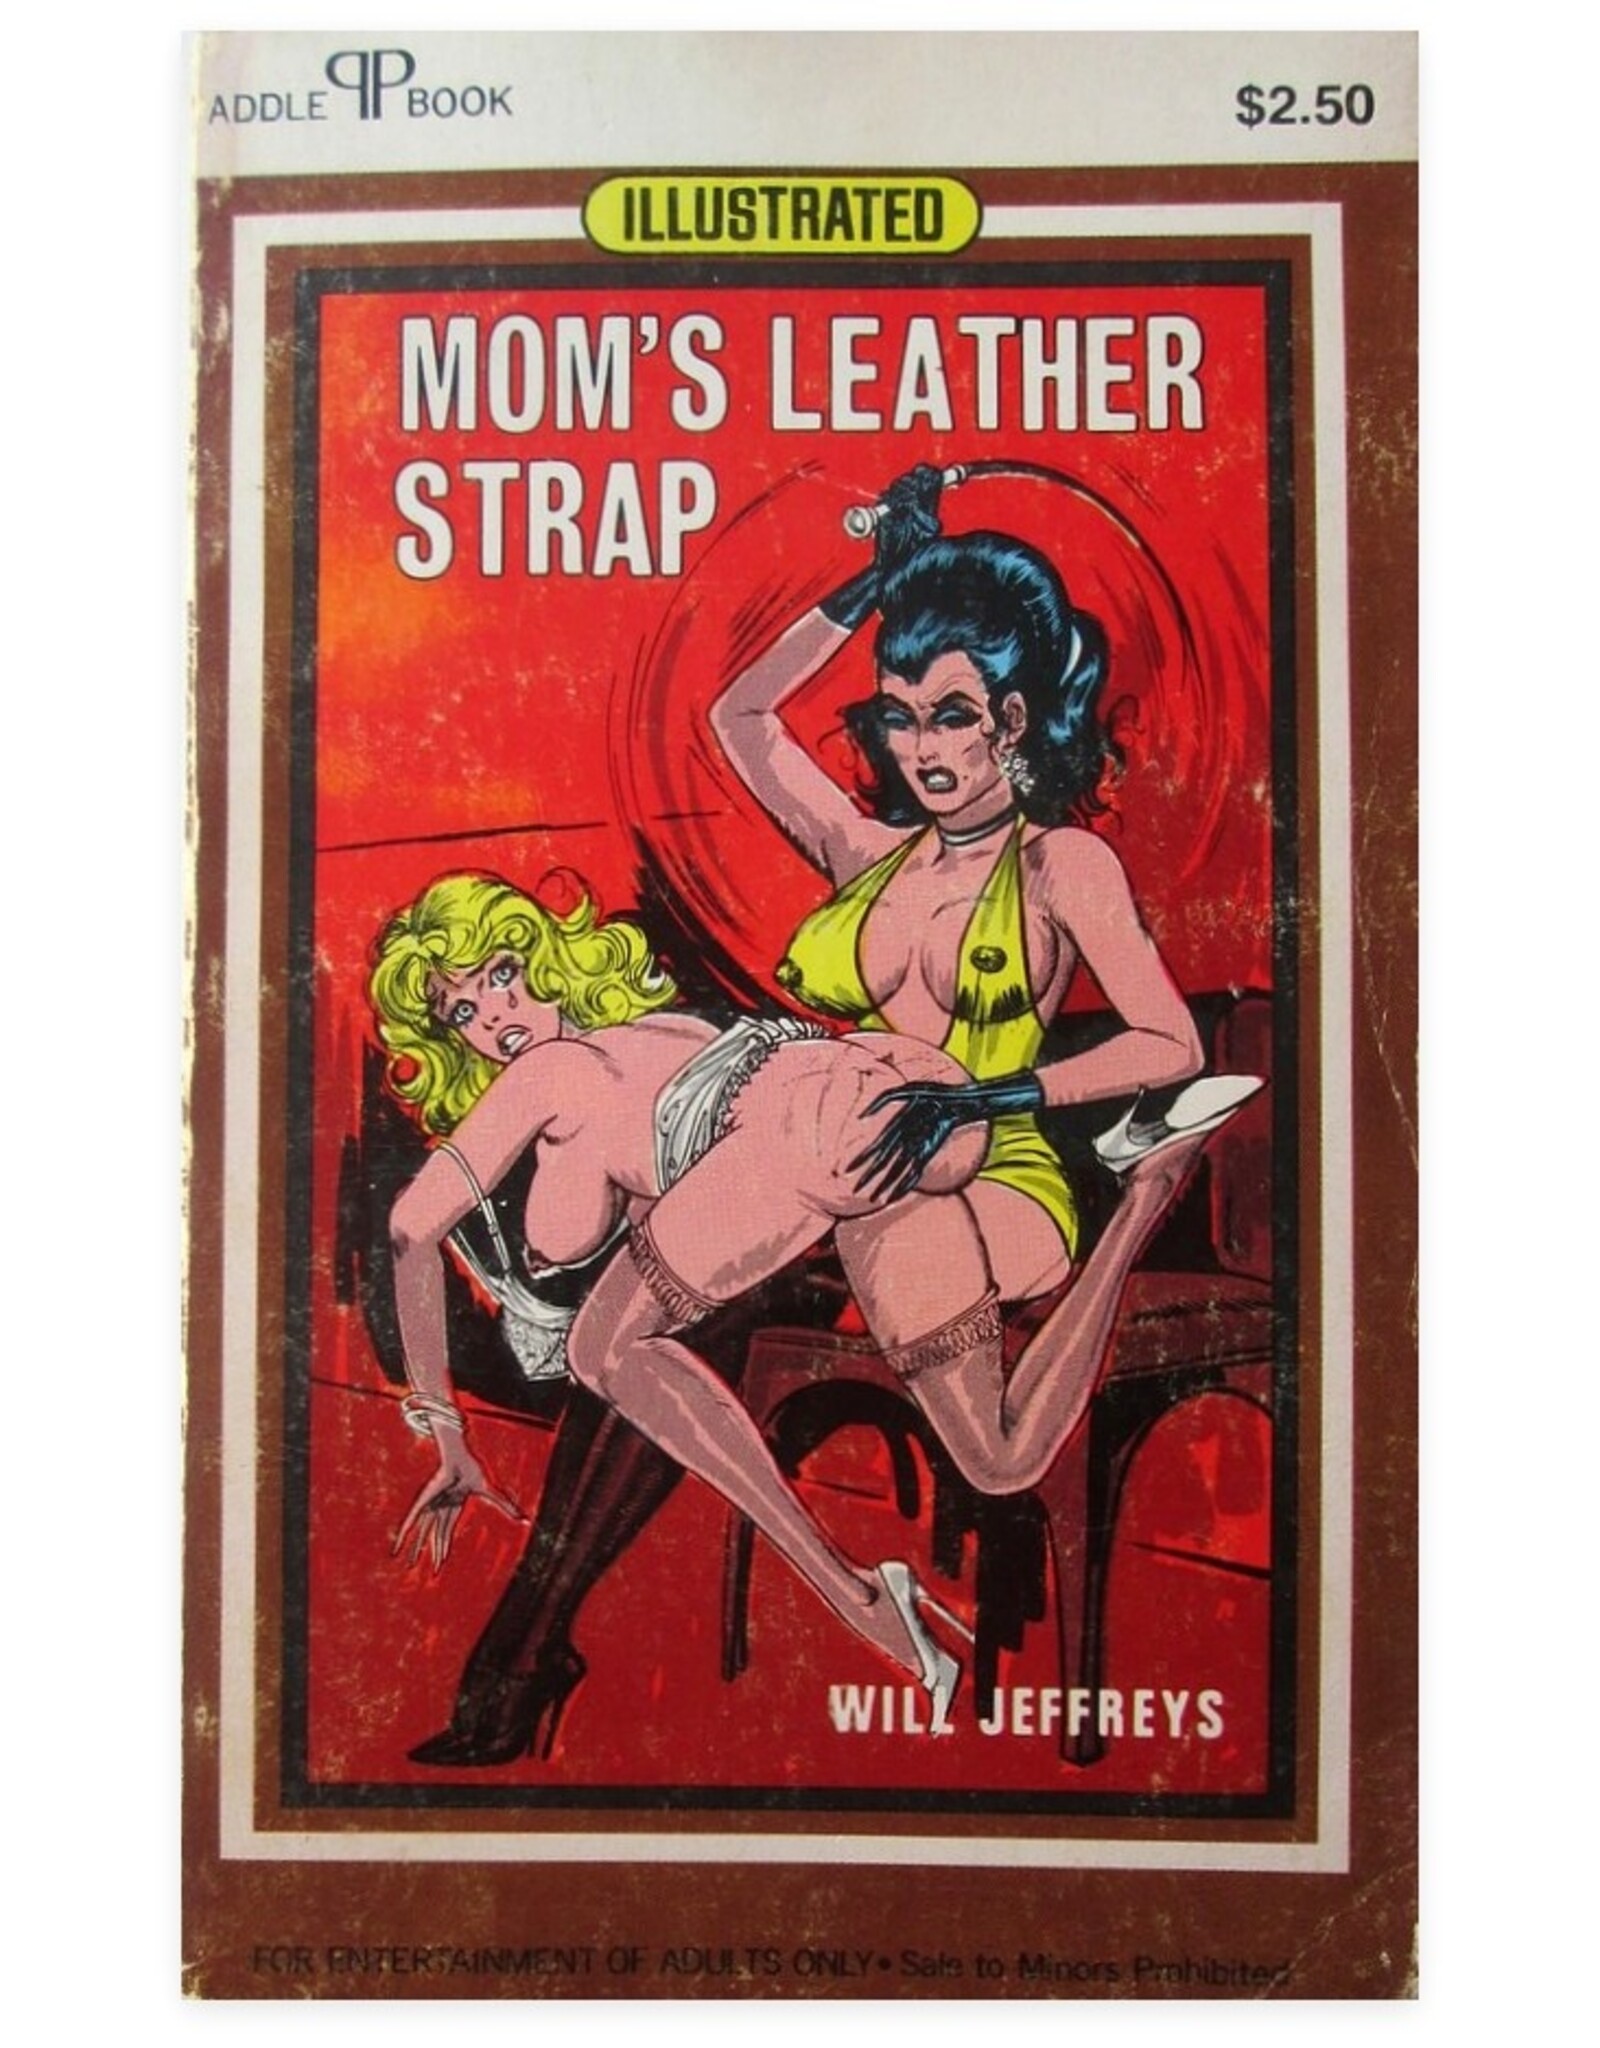 Will Jeffreys - Mom's Leather Strap. [Illustrated. For entertainment of adults only]